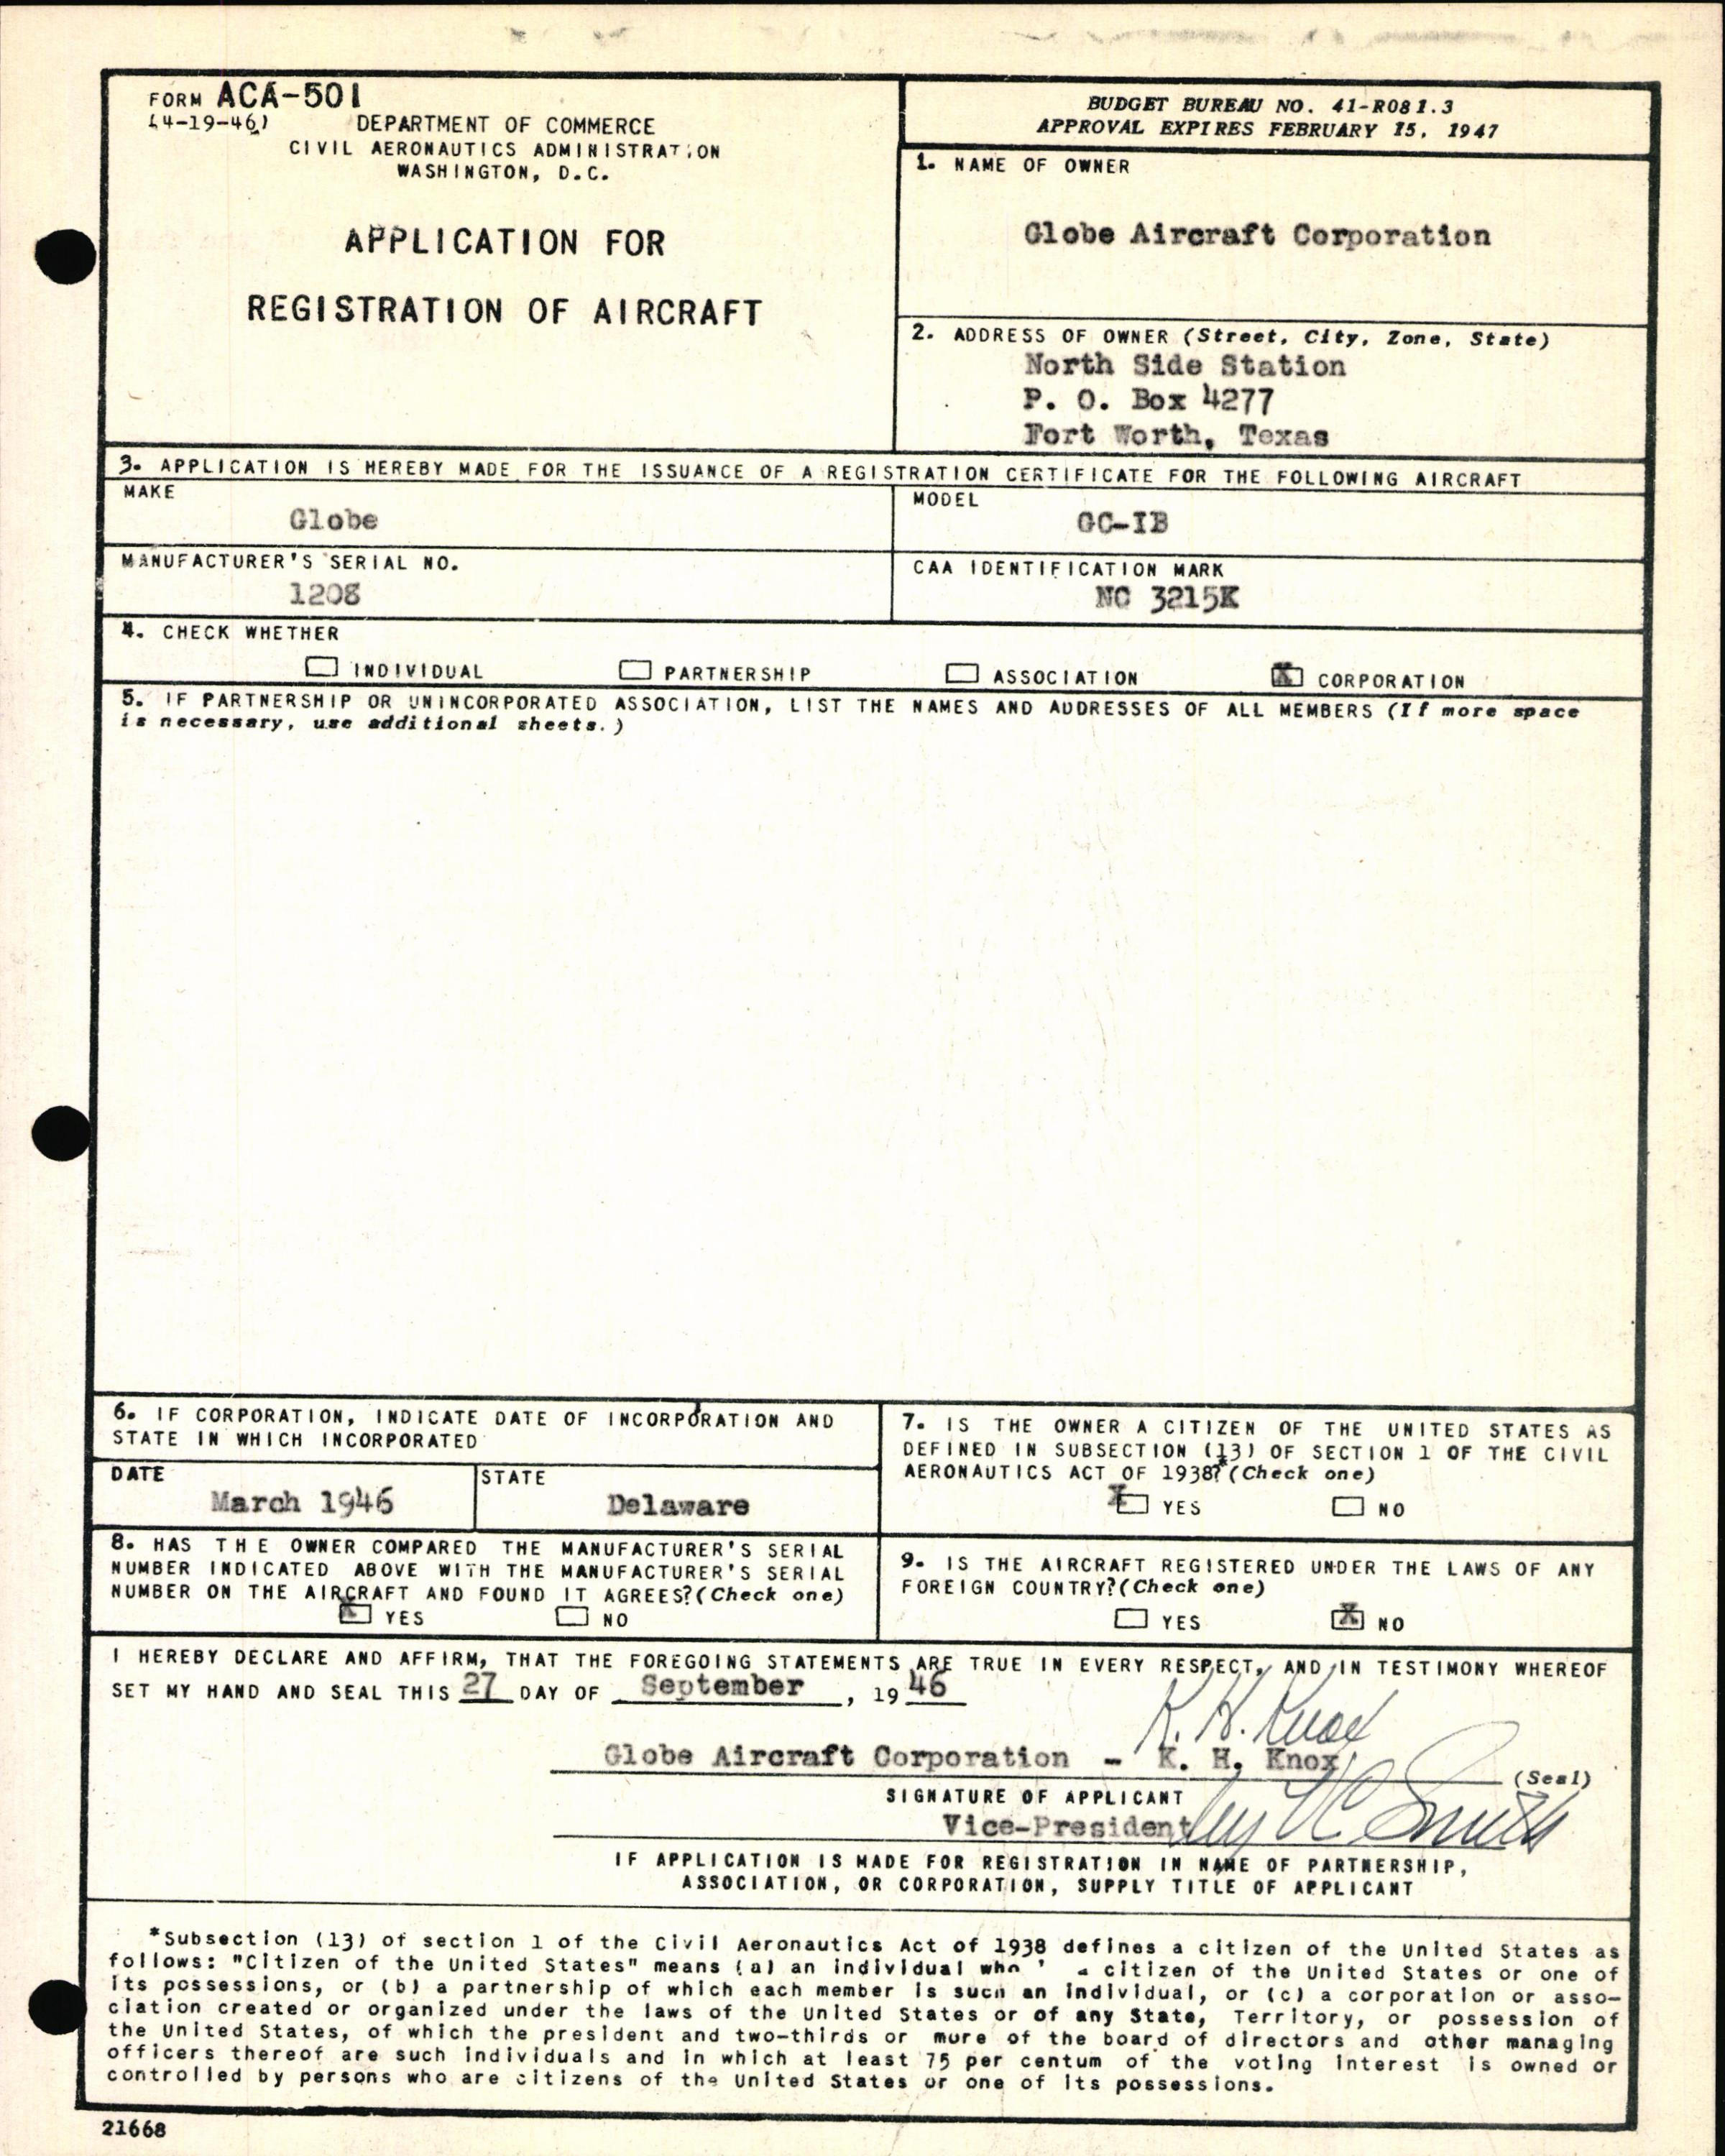 Sample page 5 from AirCorps Library document: Technical Information for Serial Number 1208